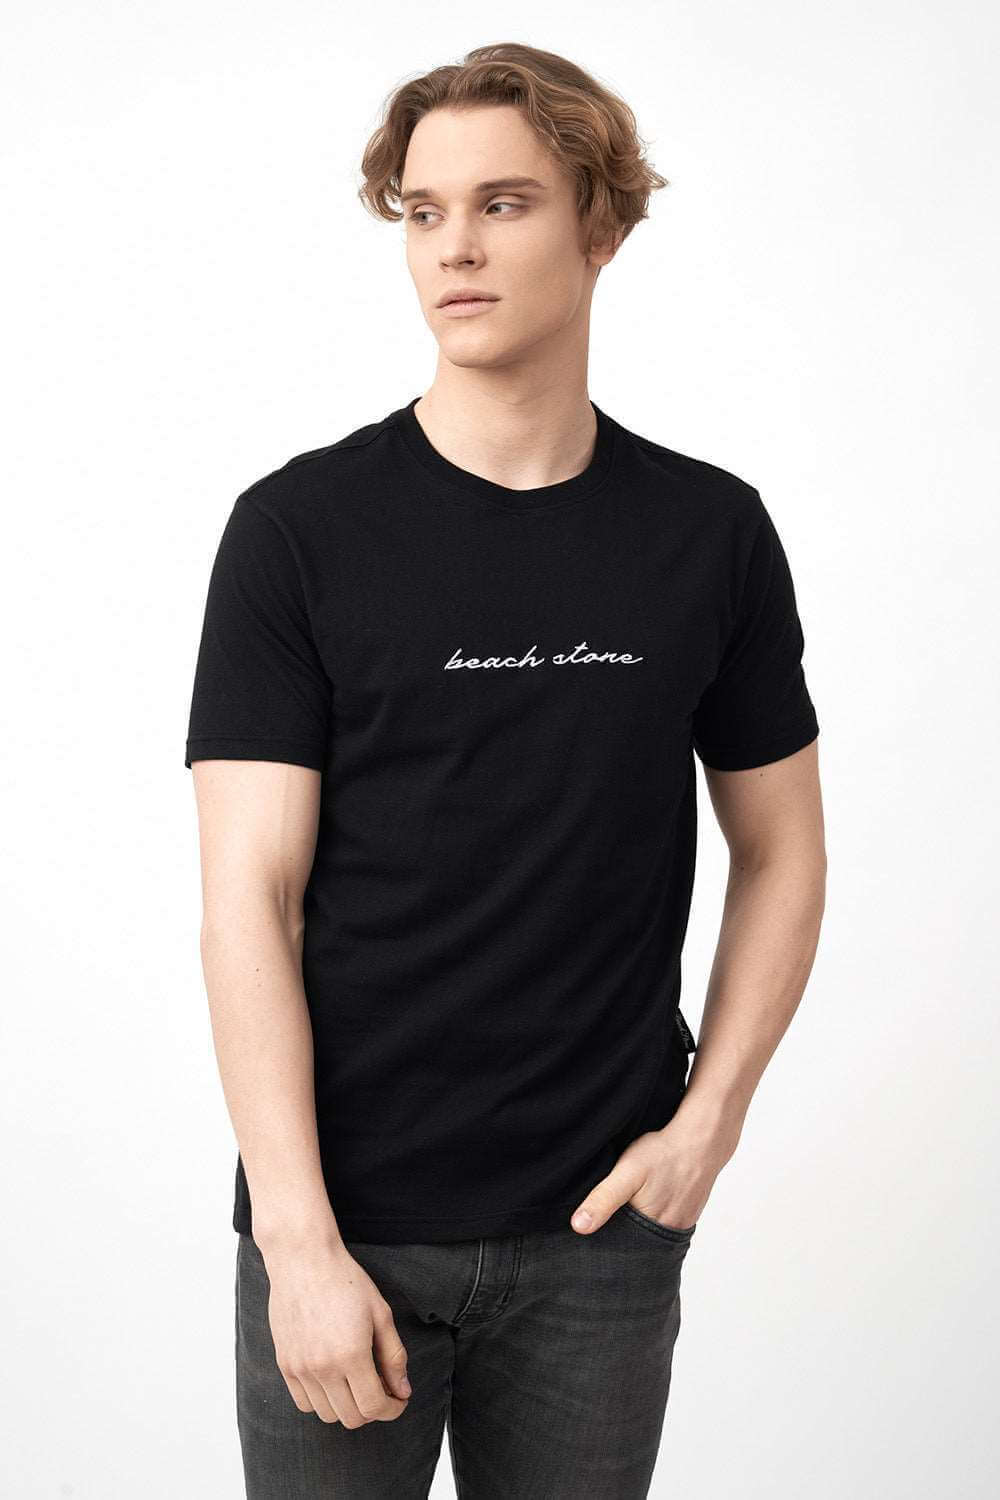 Front View of Men's Short Sleeve Shirts in Black with Embroidered Logo